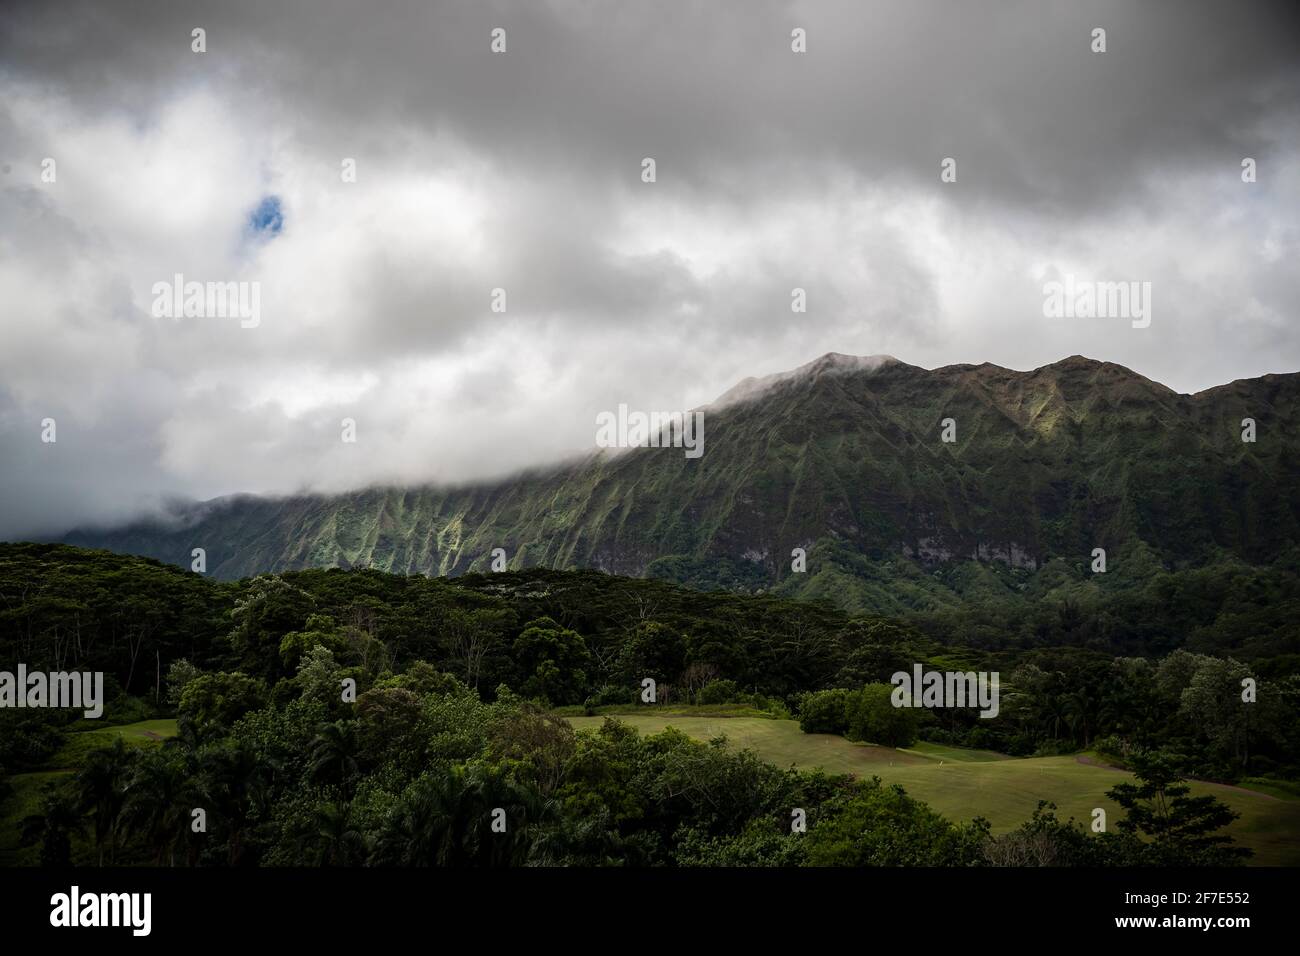 Dark storm clouds looming over the mountains in Oahu Stock Photo